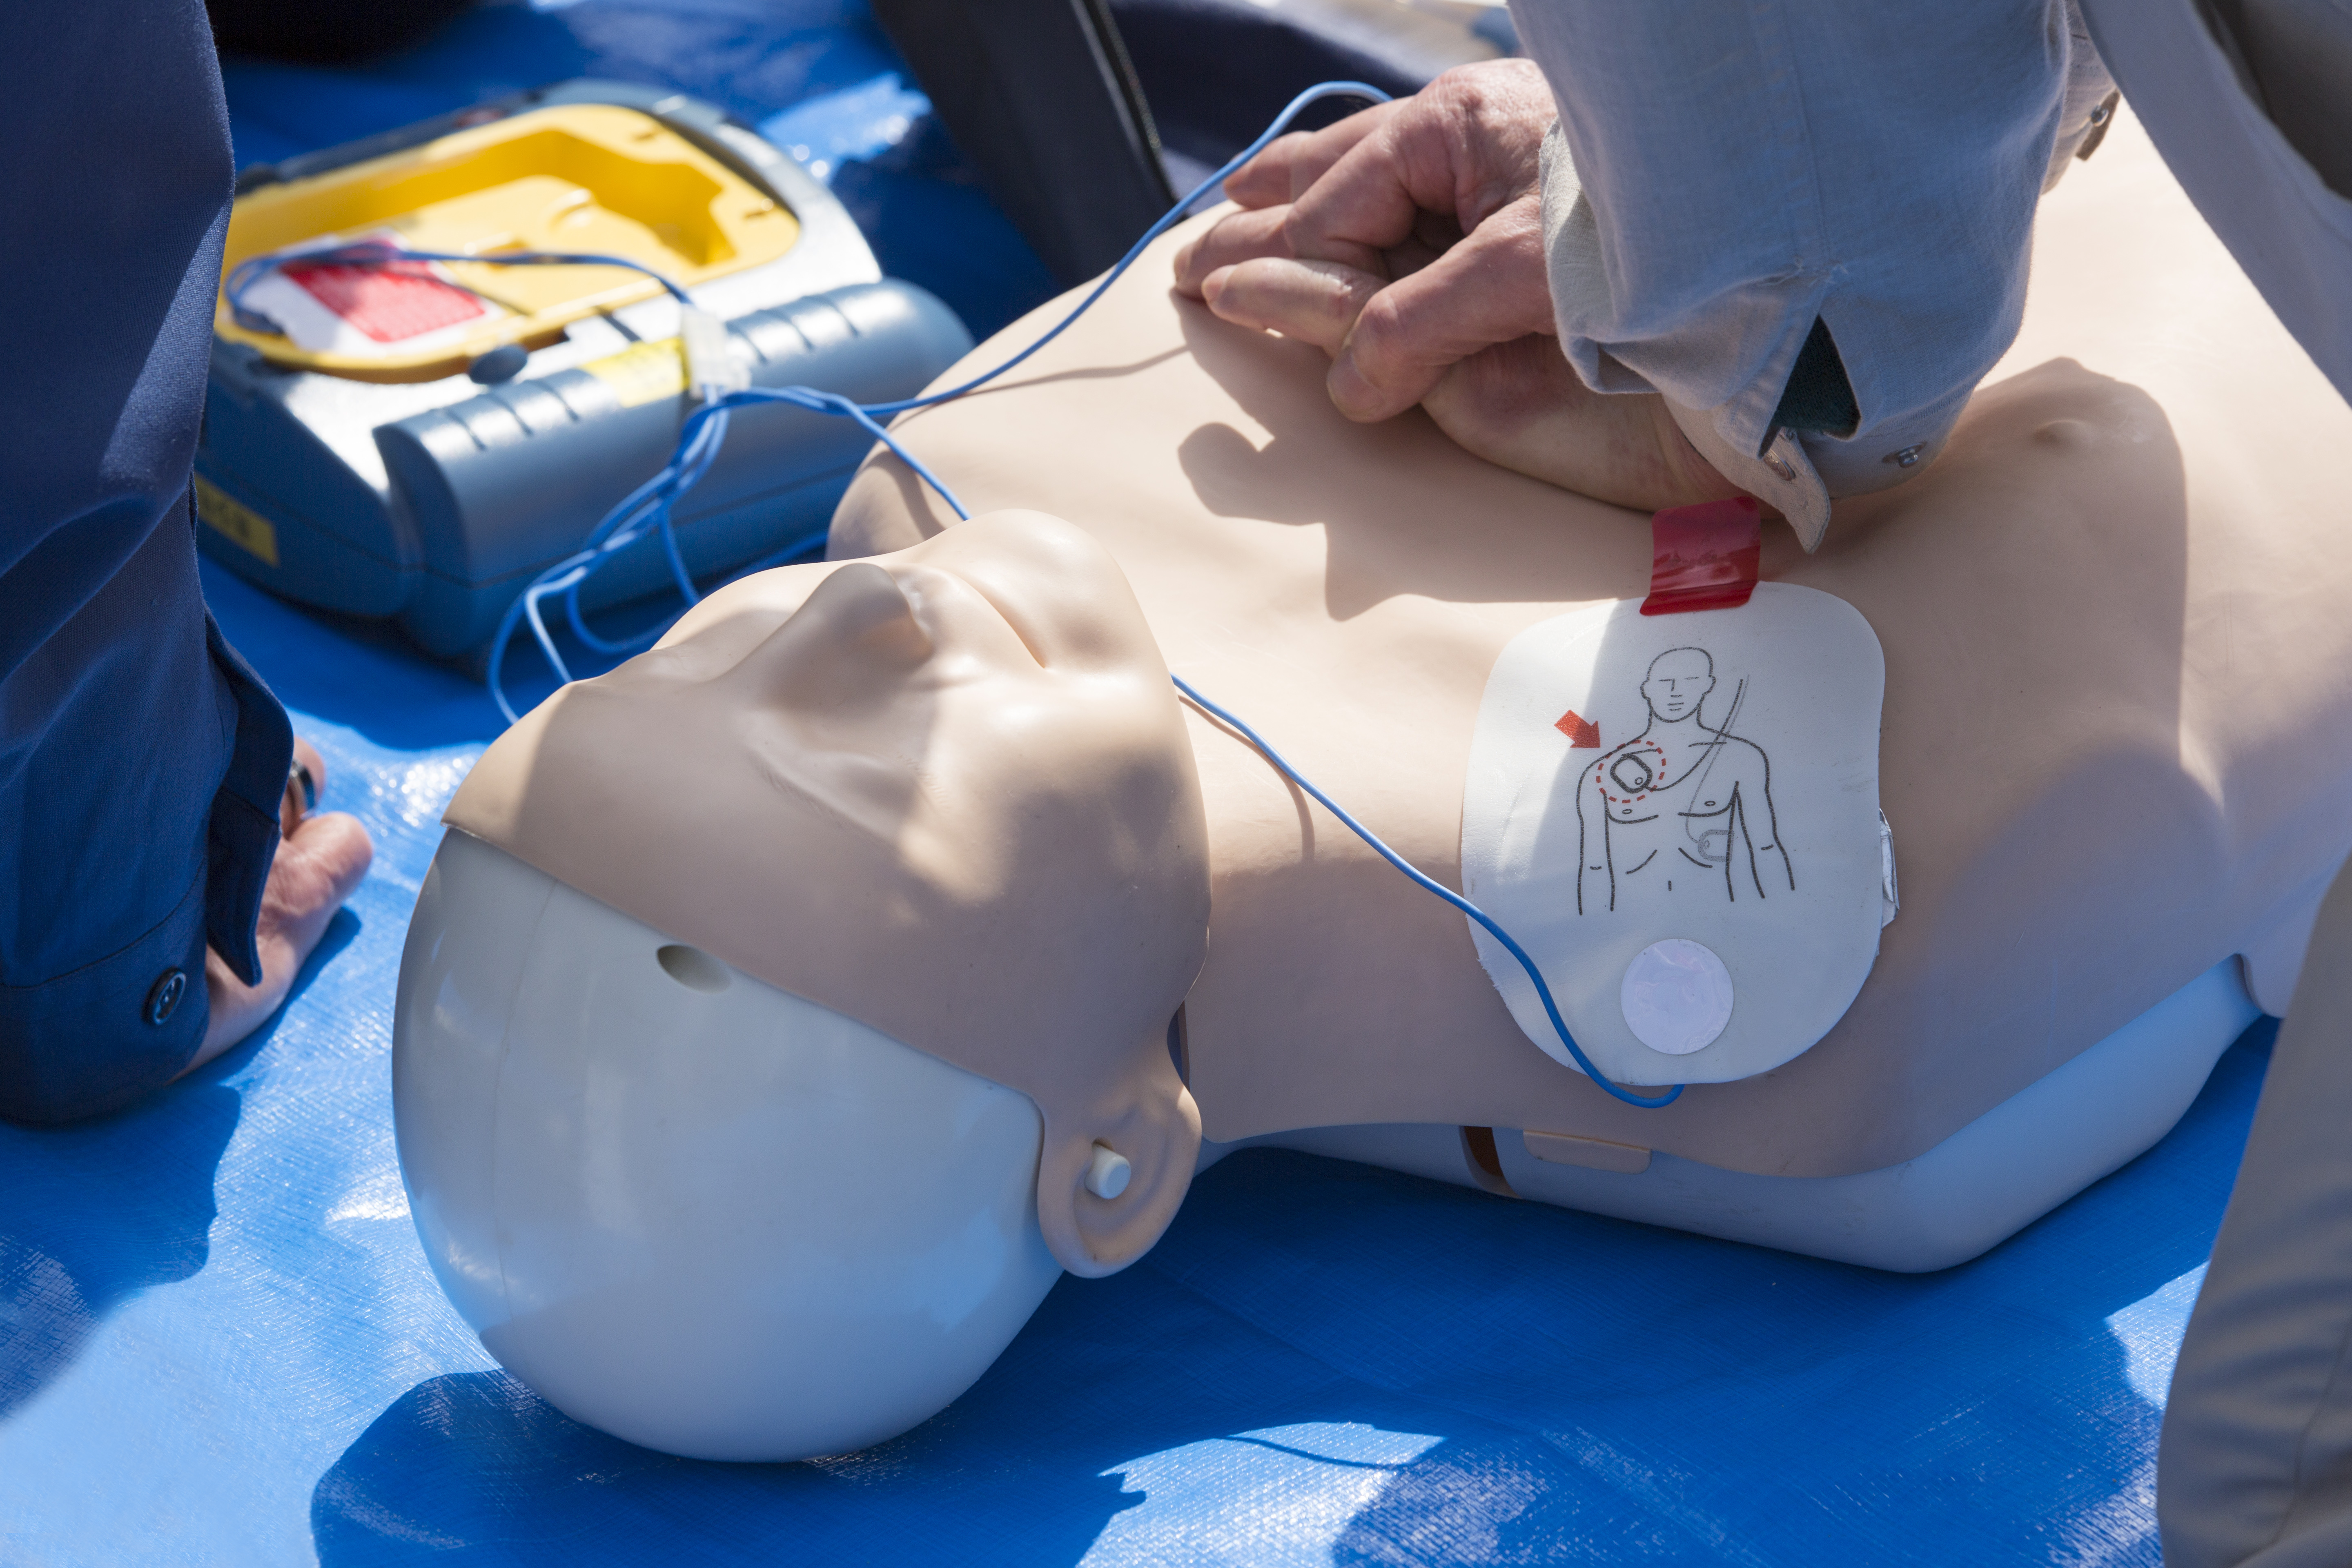 Hands placed on AED dummy